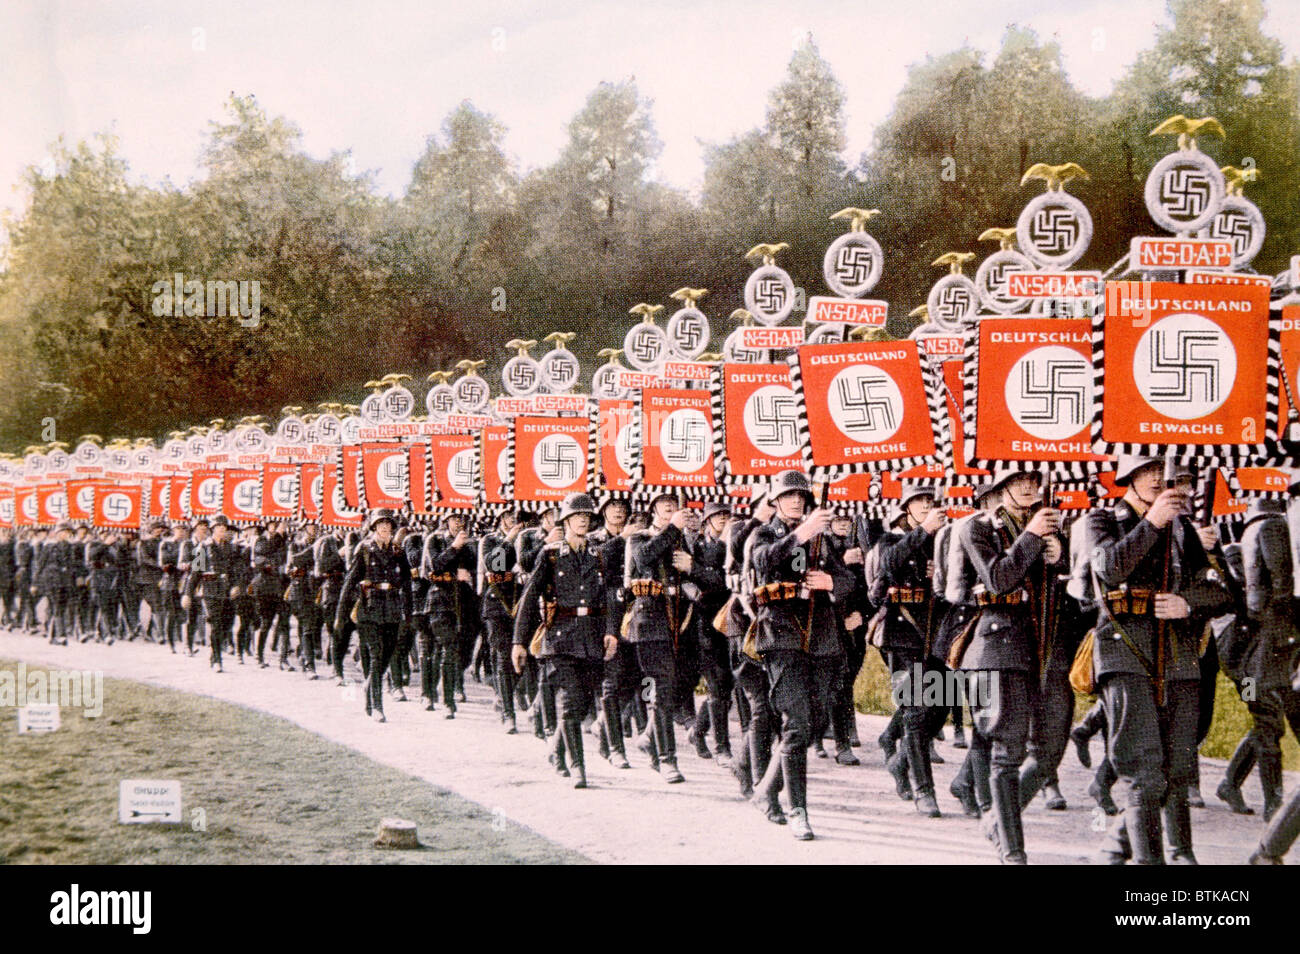 Nazi Germany, Nazi SS troops marching with victory standards at the Party Day rally in Nuremberg, 1933. Stock Photo